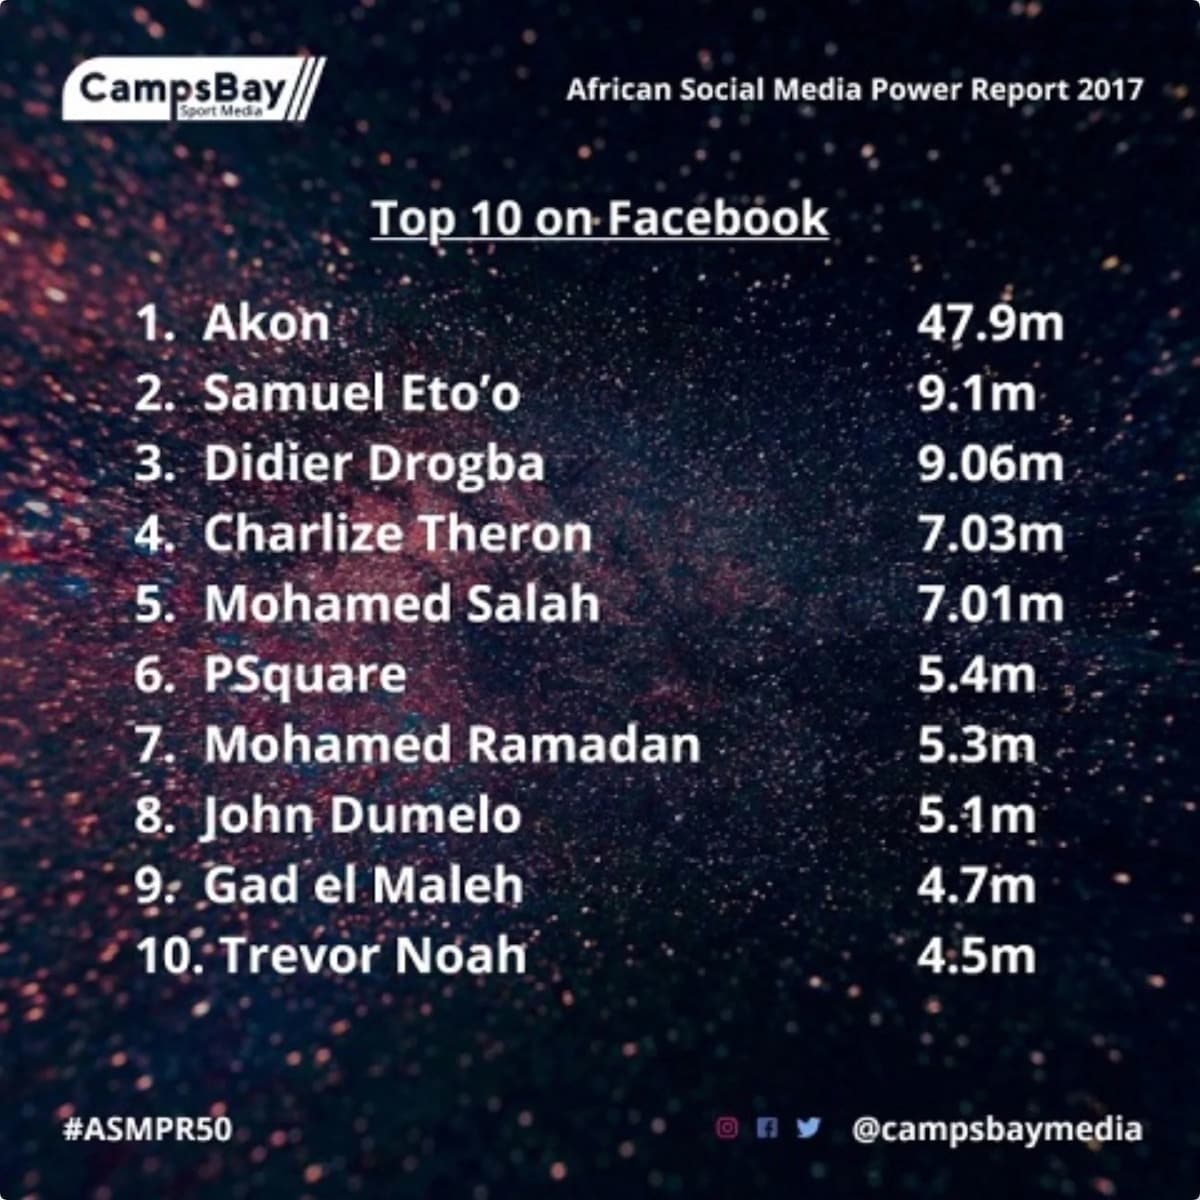 List of 10 most powerful Africans on social media released; only one Ghanaian made the list